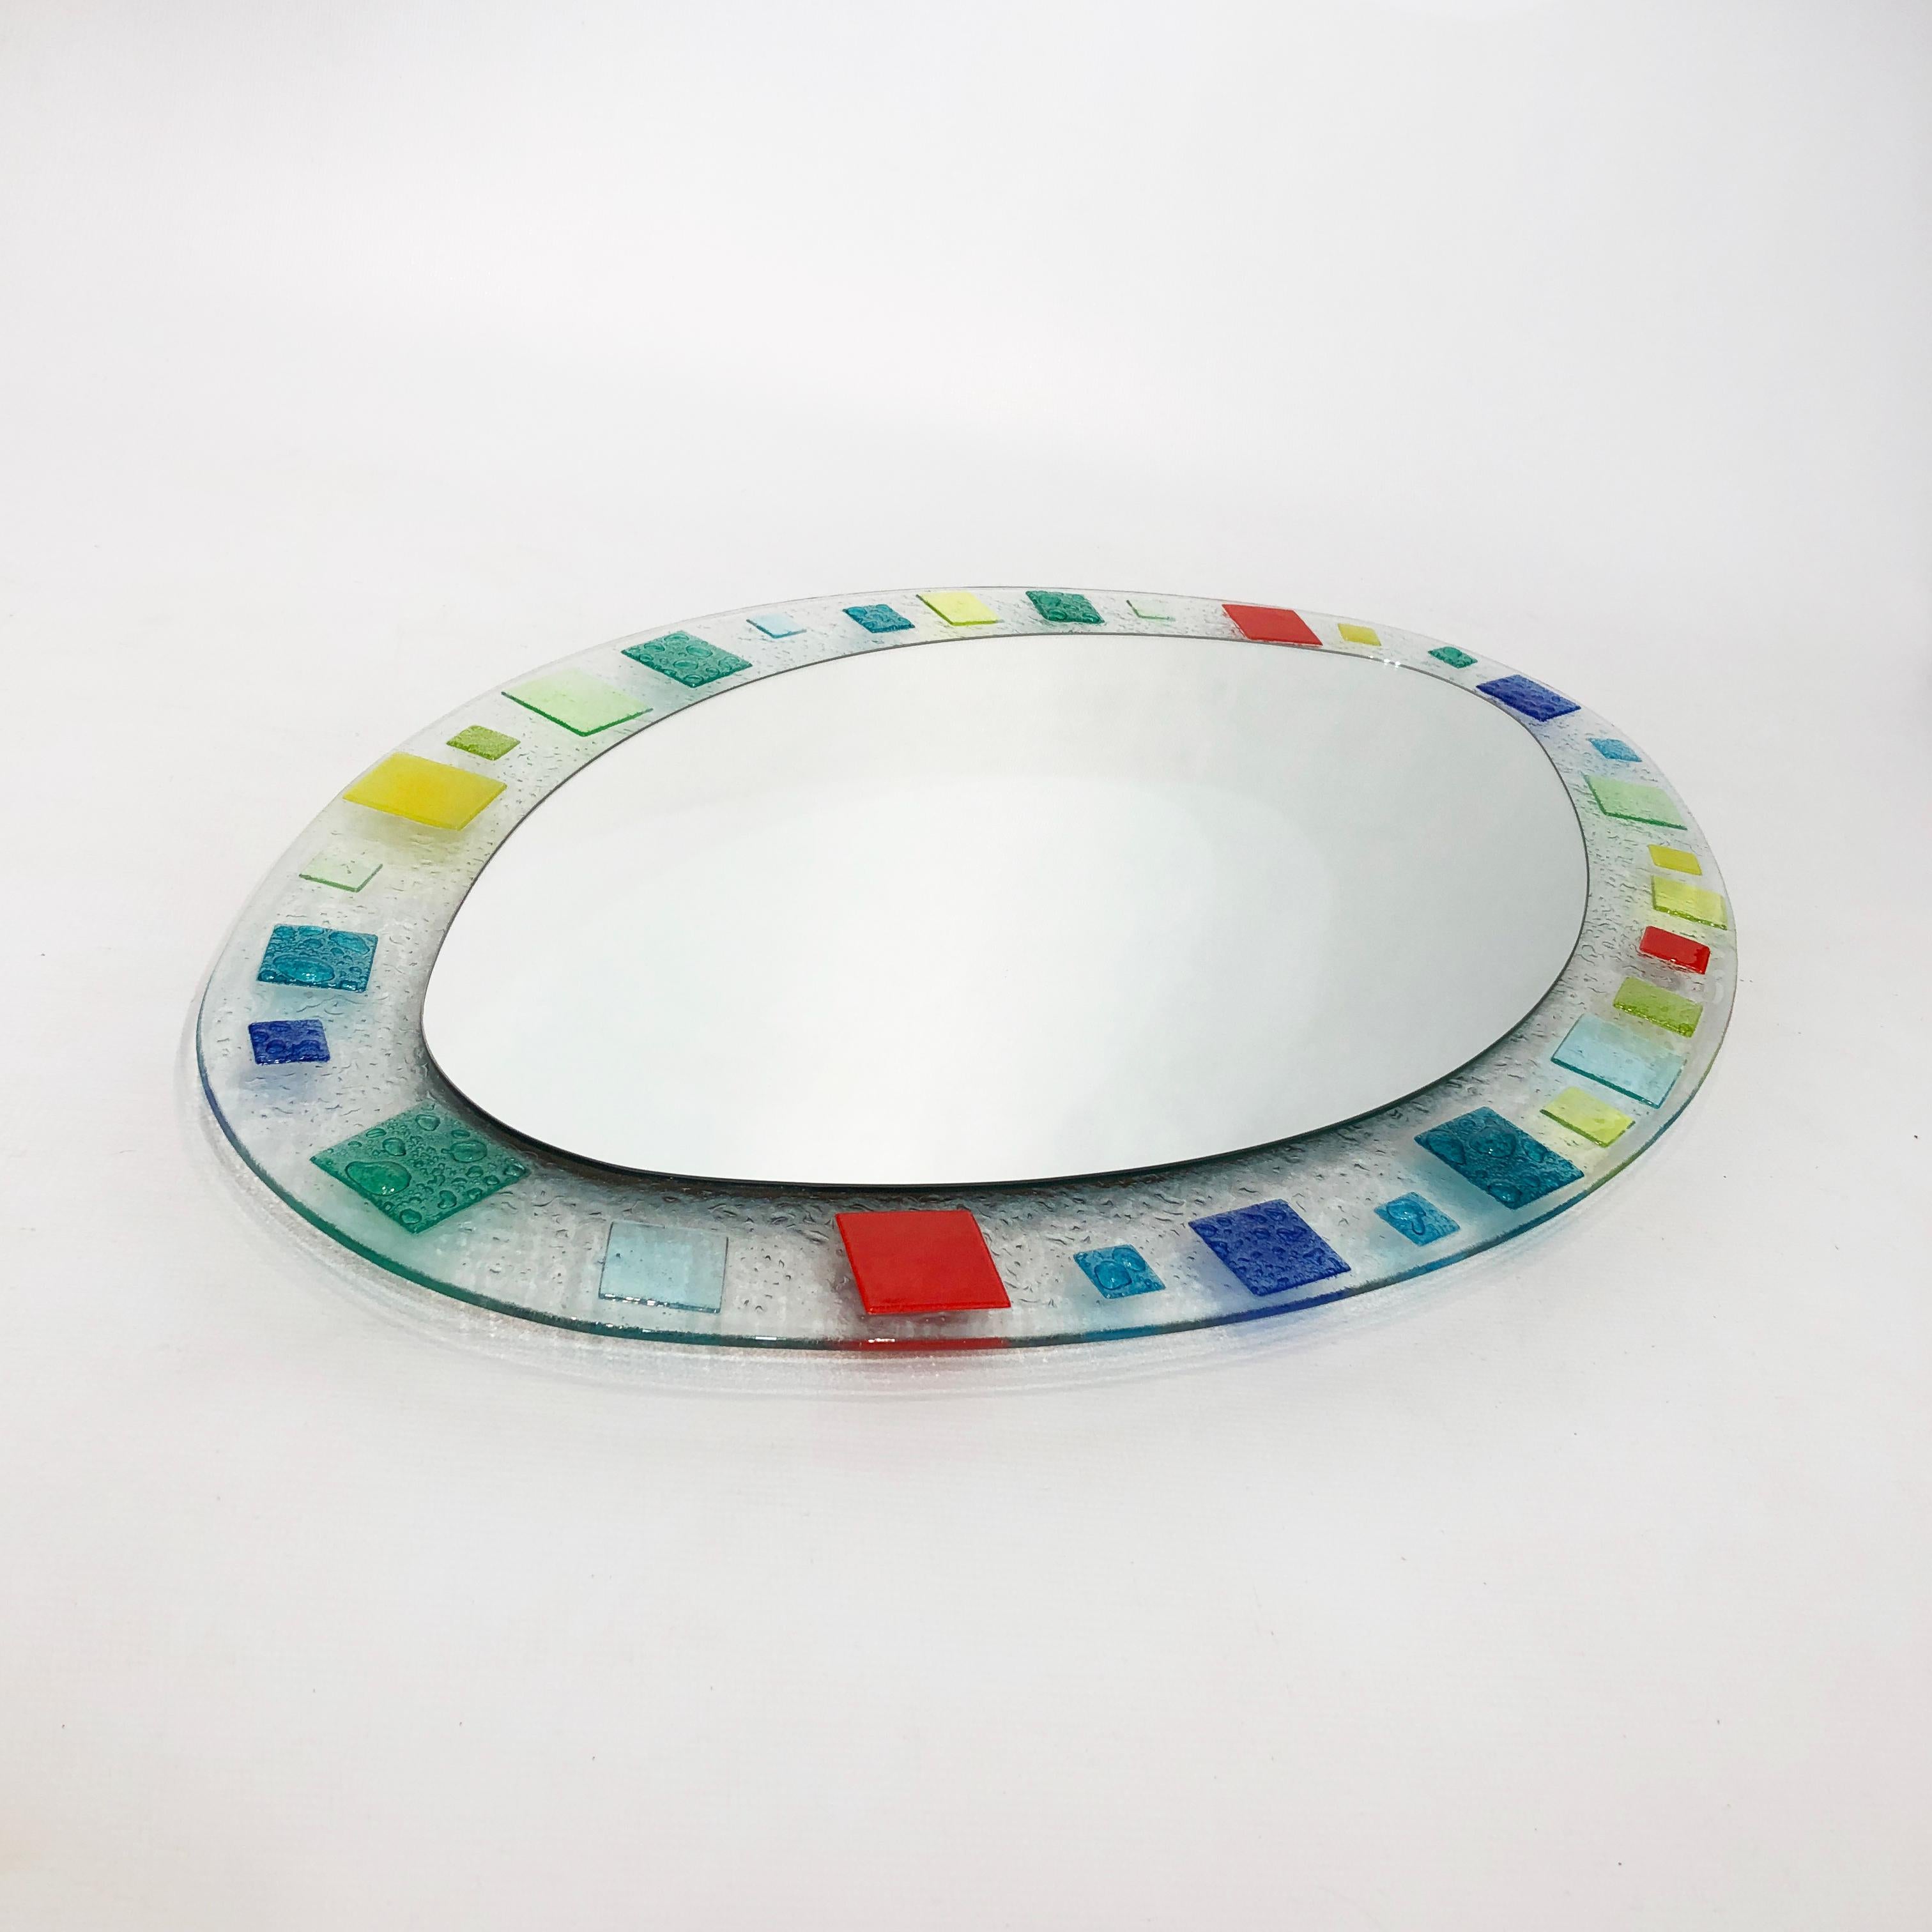 Italian Murano Glass Oval Wall Mirror 1970s Midcentury Vintage Red Blue Green